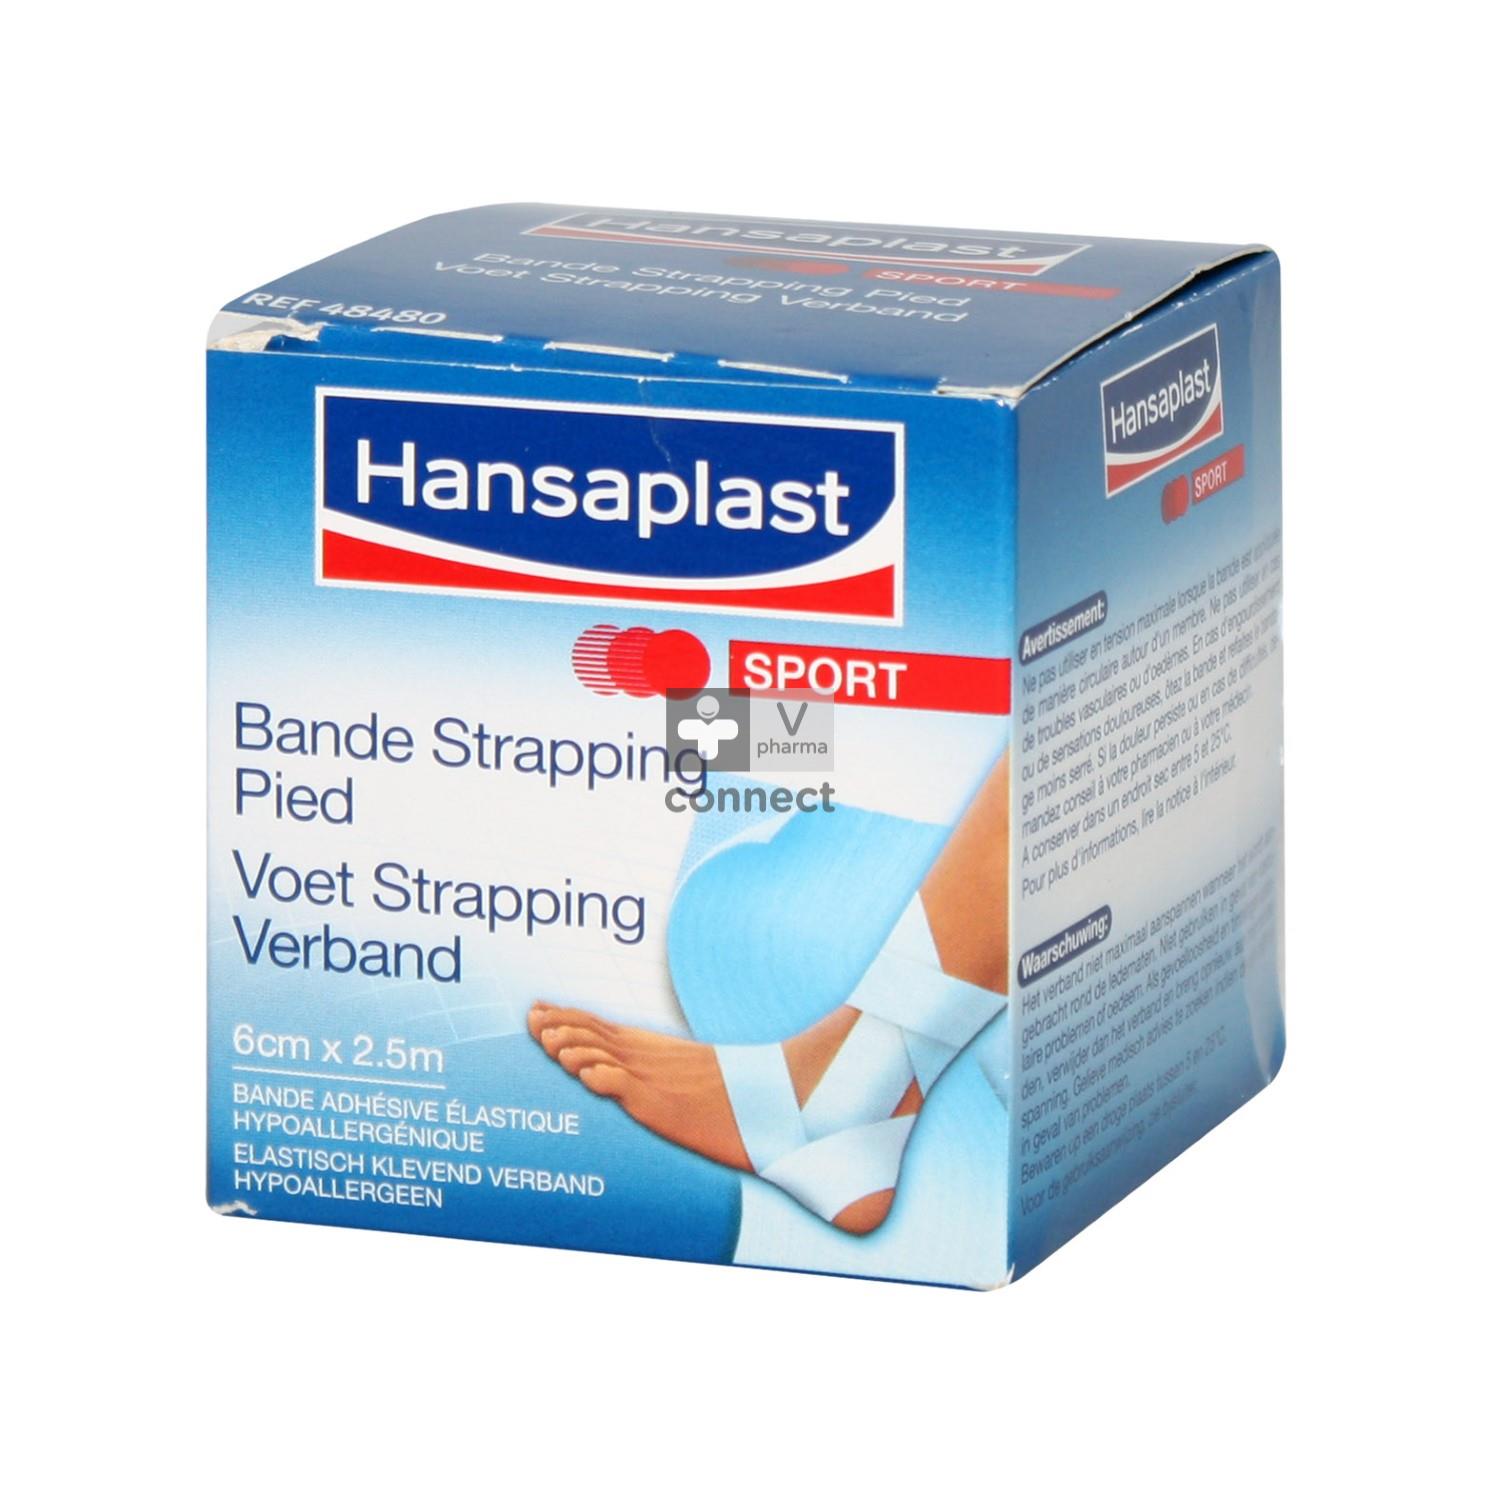 Bande strapping 